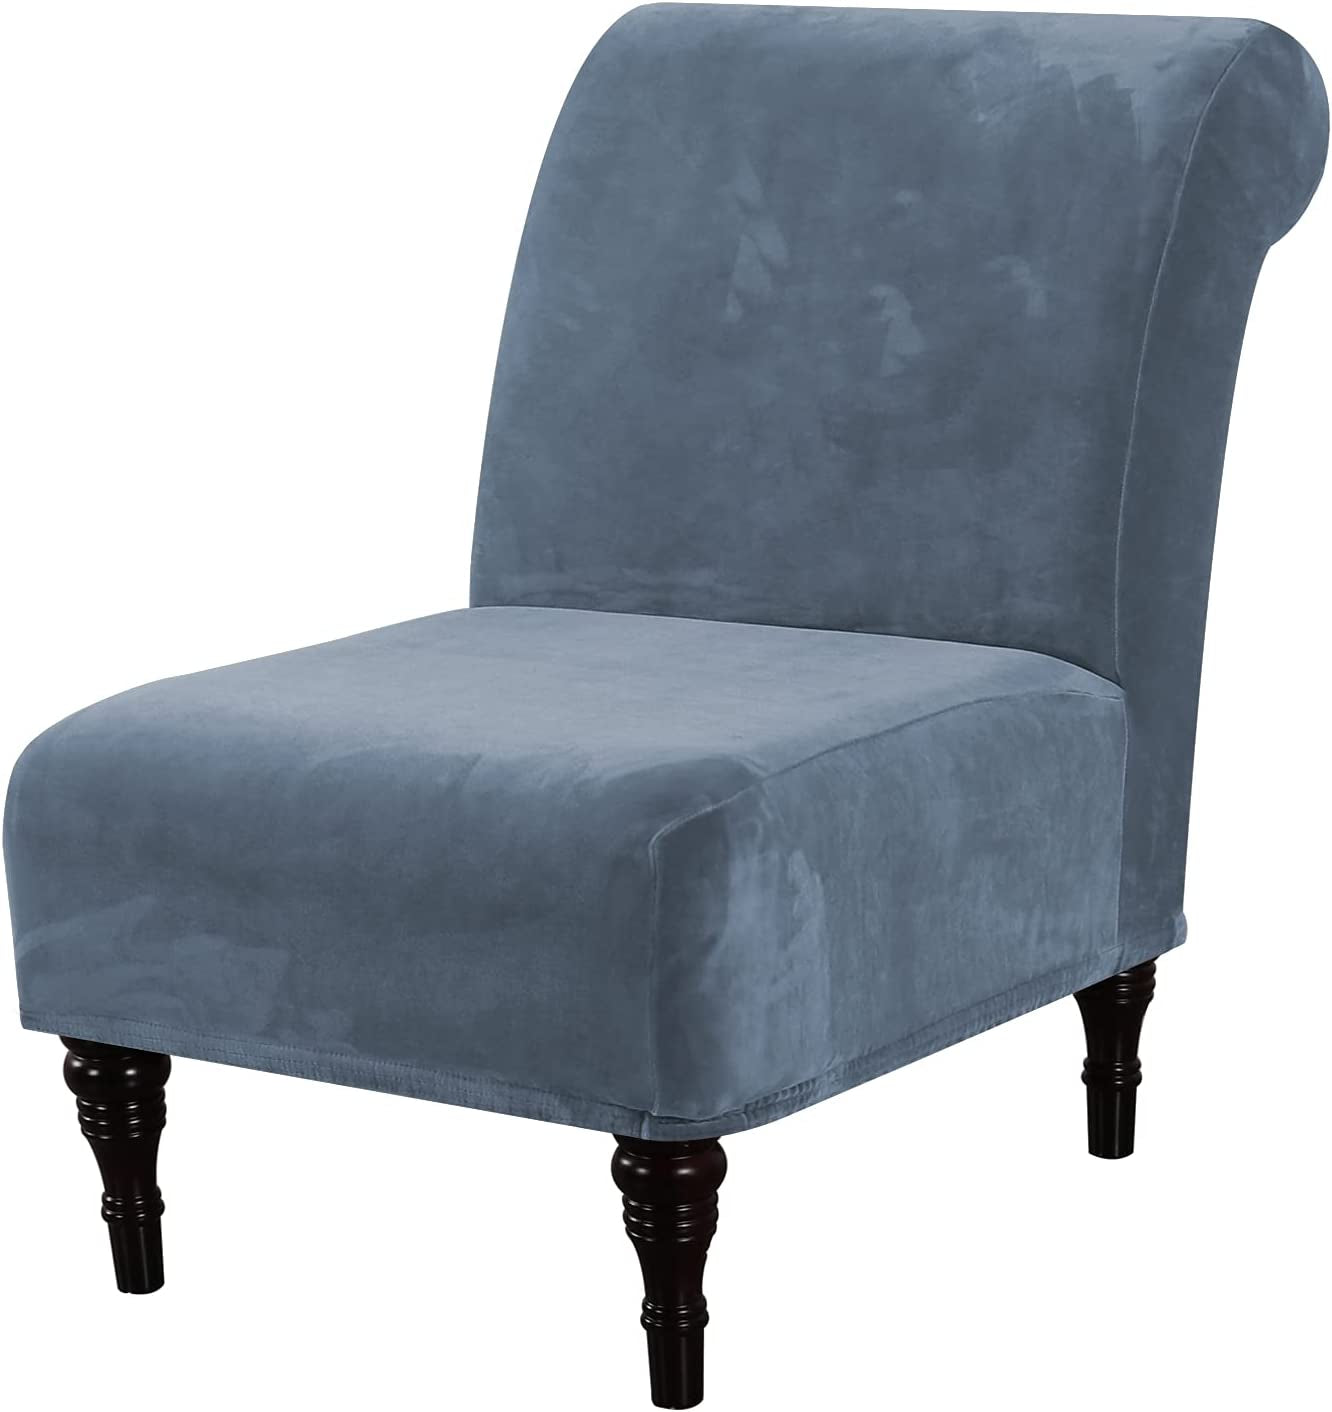 Velvet Accent Chair Covers High Stretch Armless Chair Covers for Living Room Luxury Thick Velvet Chair Slipcovers Modern Furniture Protector with Elastic Bottom, Machine Washable, Navy